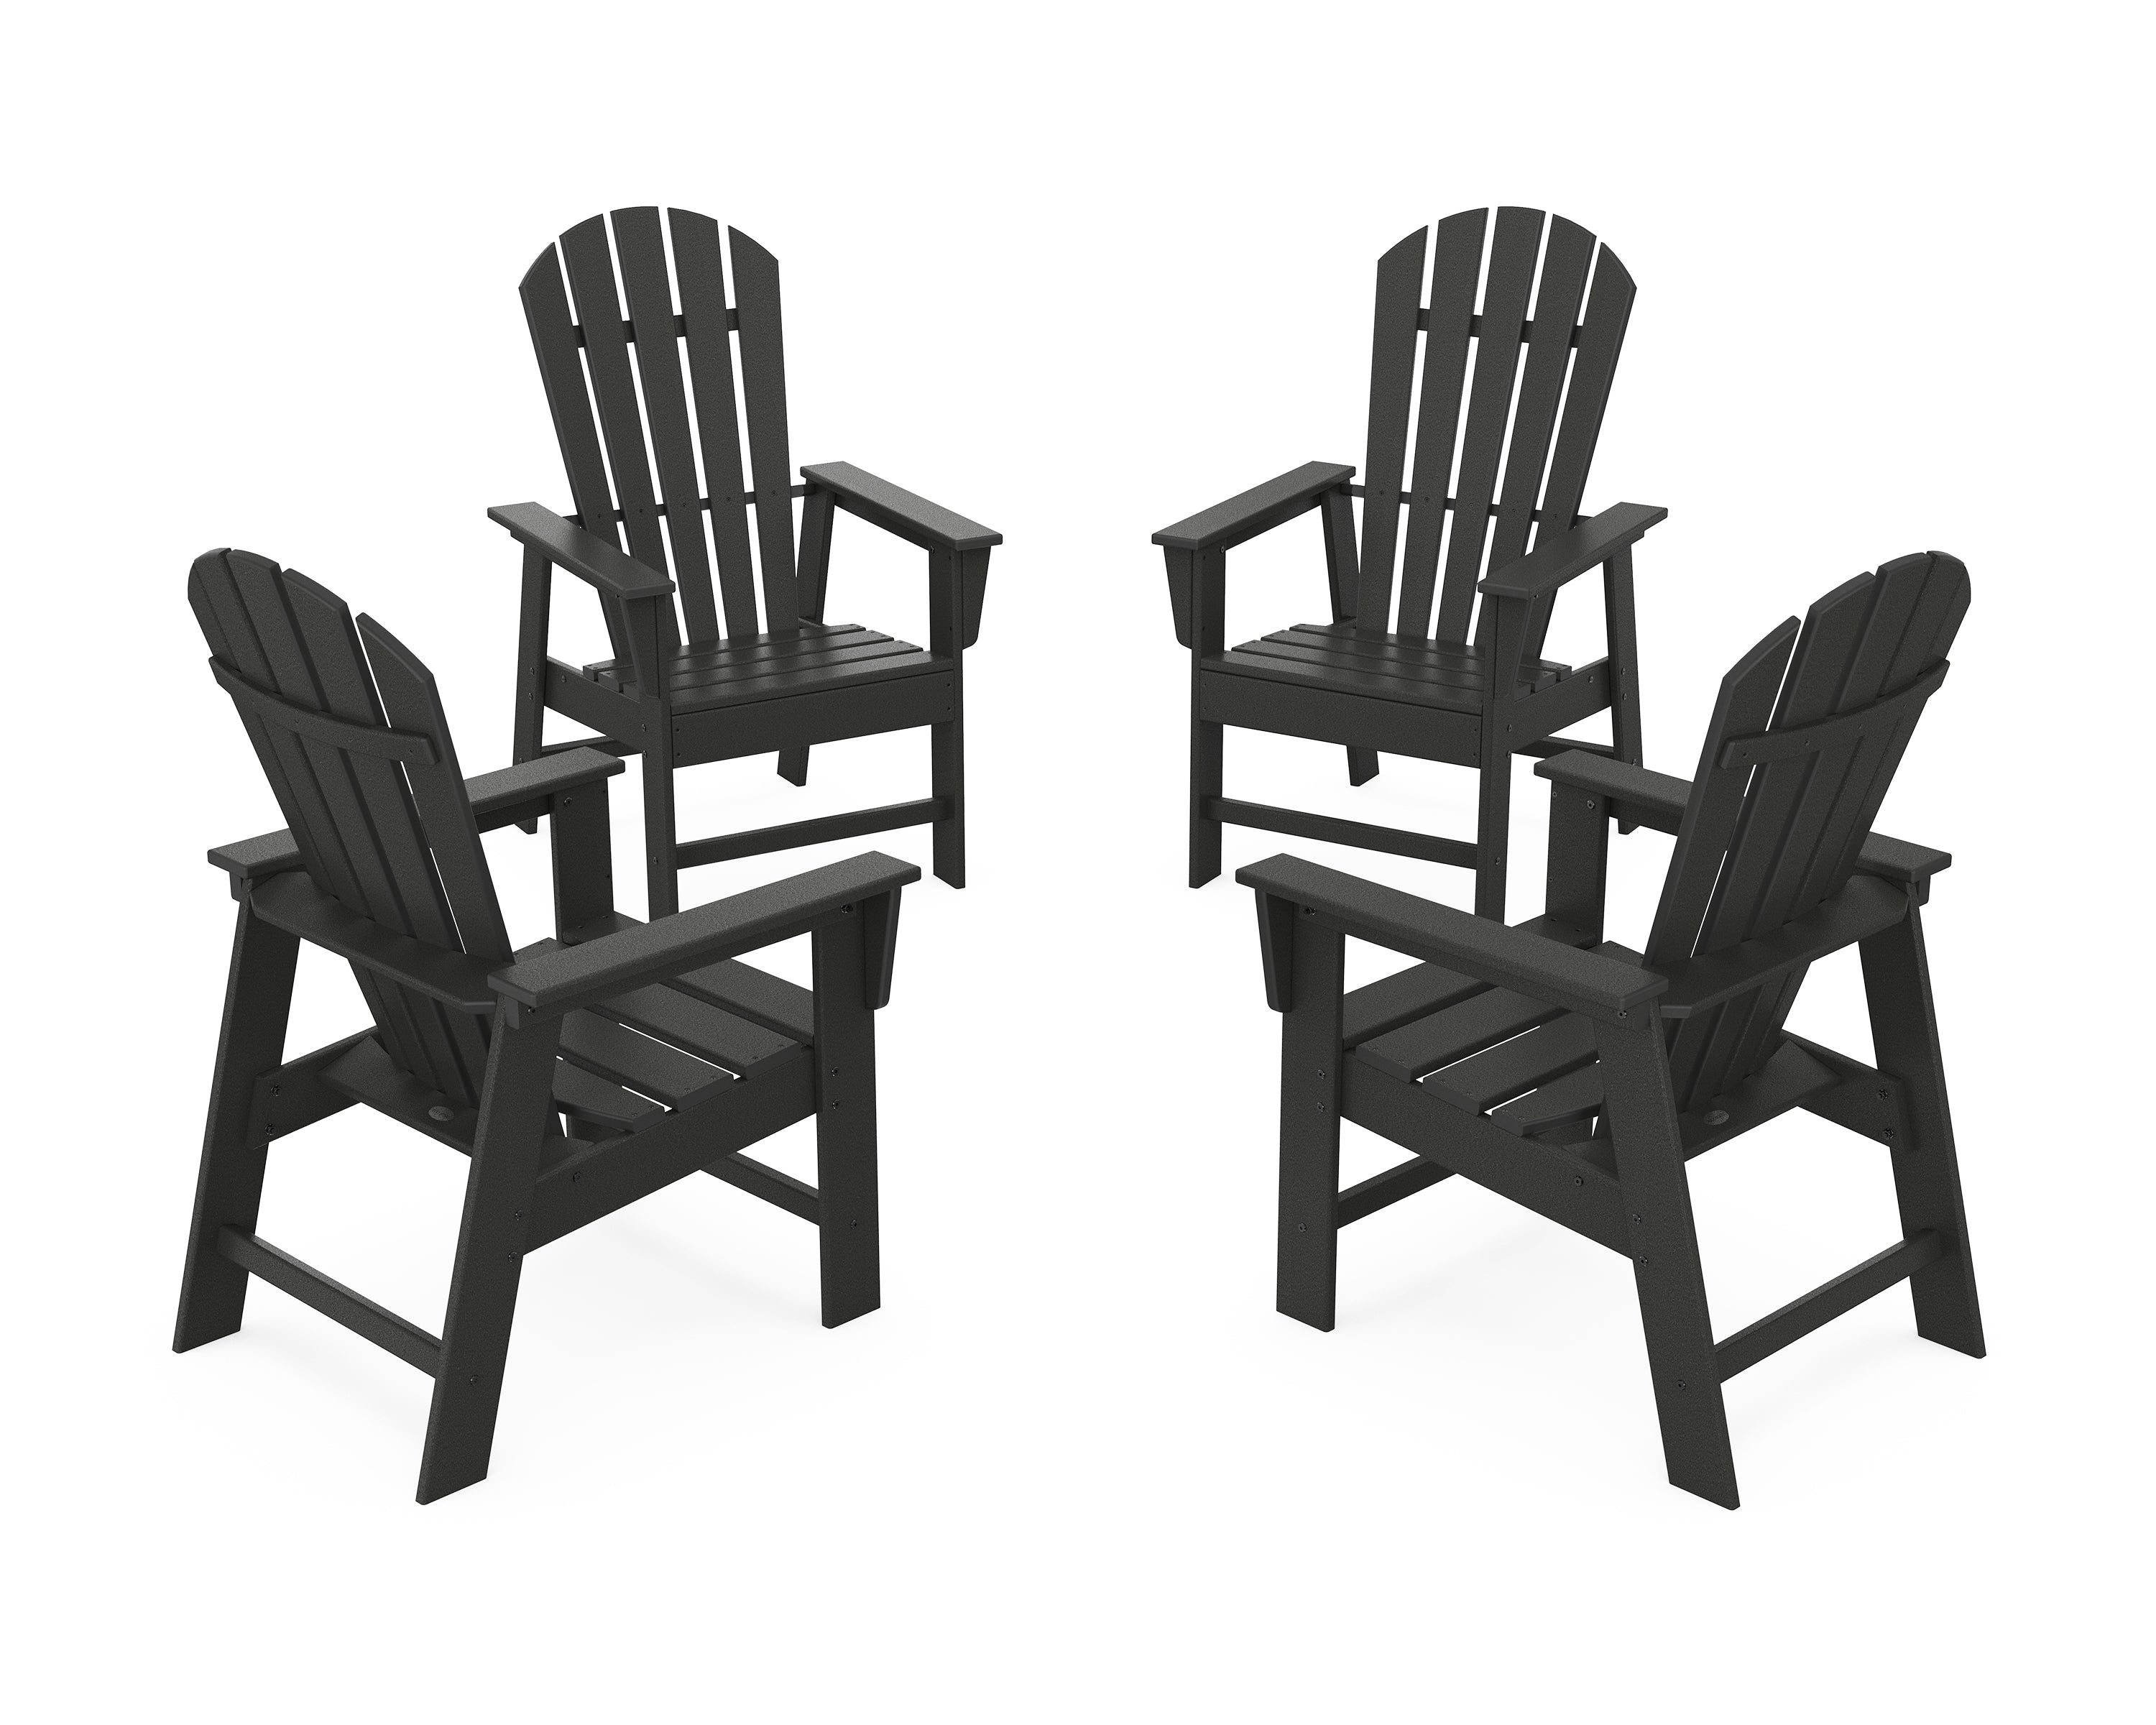 POLYWOOD® 4-Piece South Beach Casual Chair Conversation Set in Black